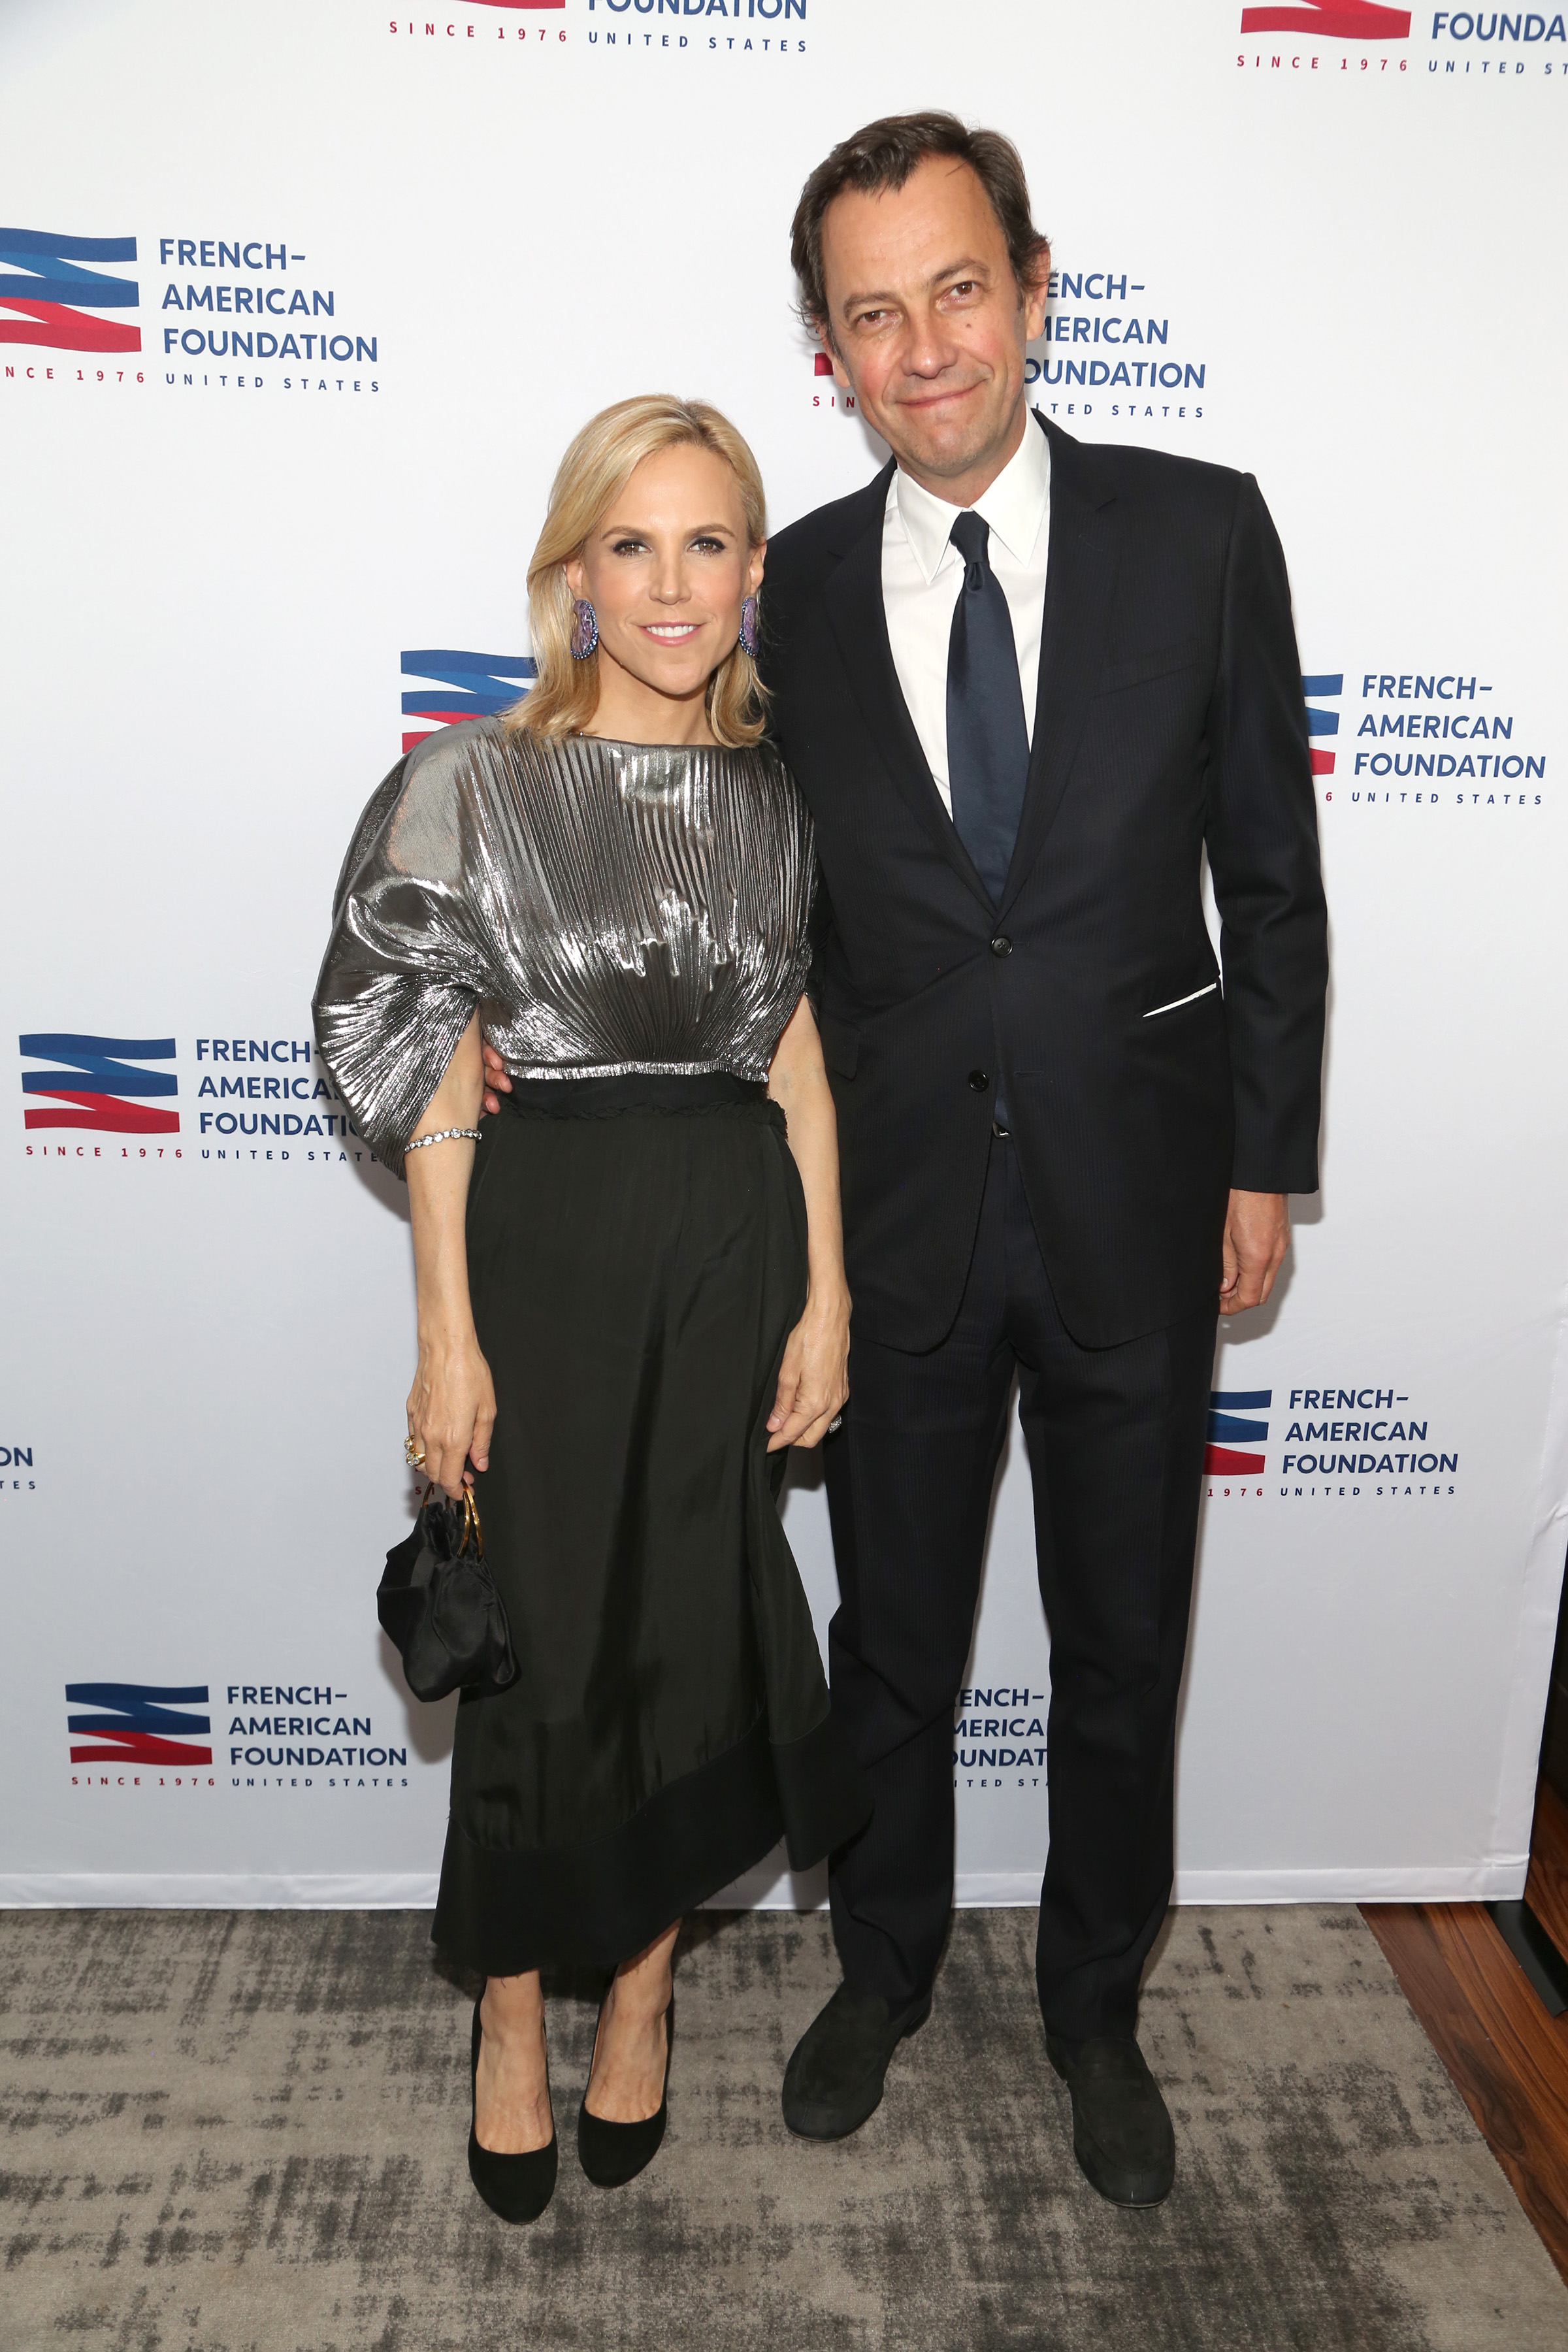 Tory Burch and Pierre-Yves Roussel attend the French-American Foundation – United States Gala 2023 at The Rainbow Room on June 5, 2023, in New York City